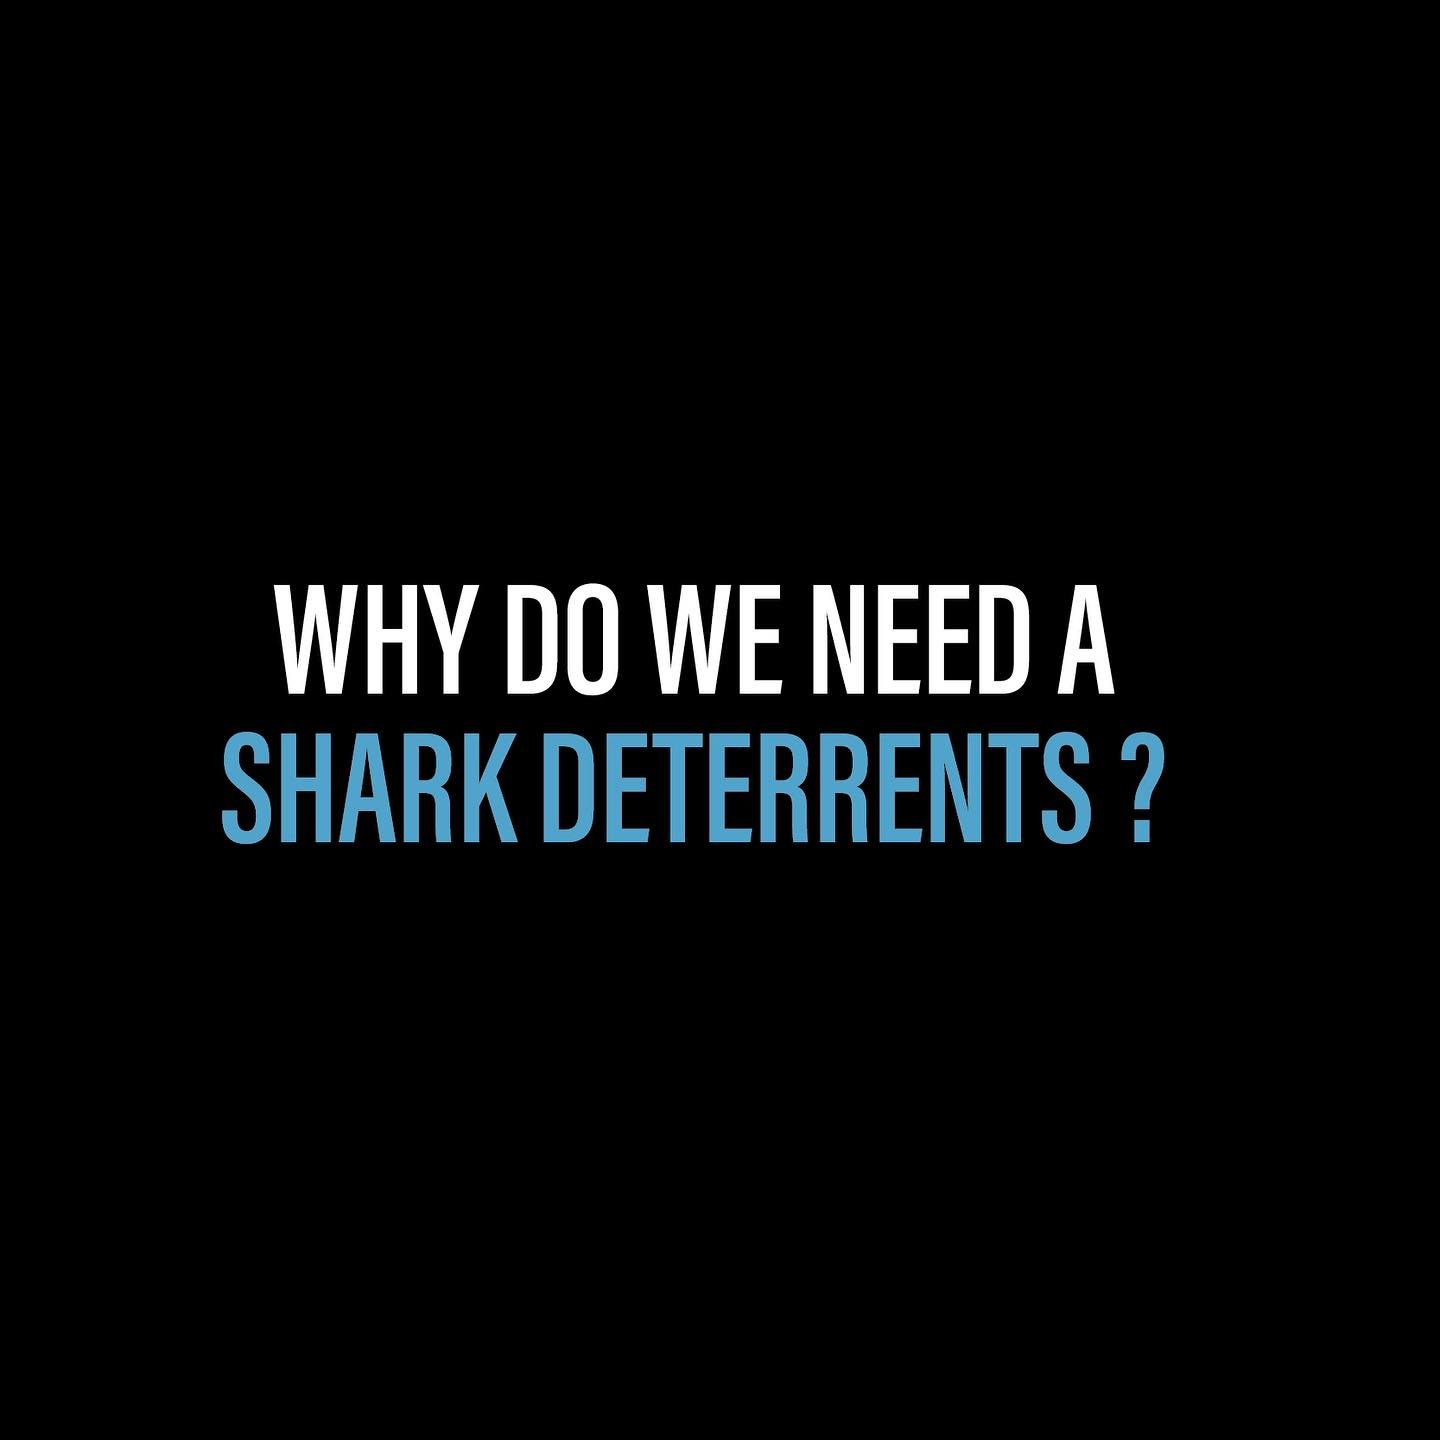 Haven&rsquo;t tried out Rpelx shark deterrent device yet? Let us tell you 3 reasons why you need Rpelx! 

#sharkdeterrent #fishingaustralia #rpelx